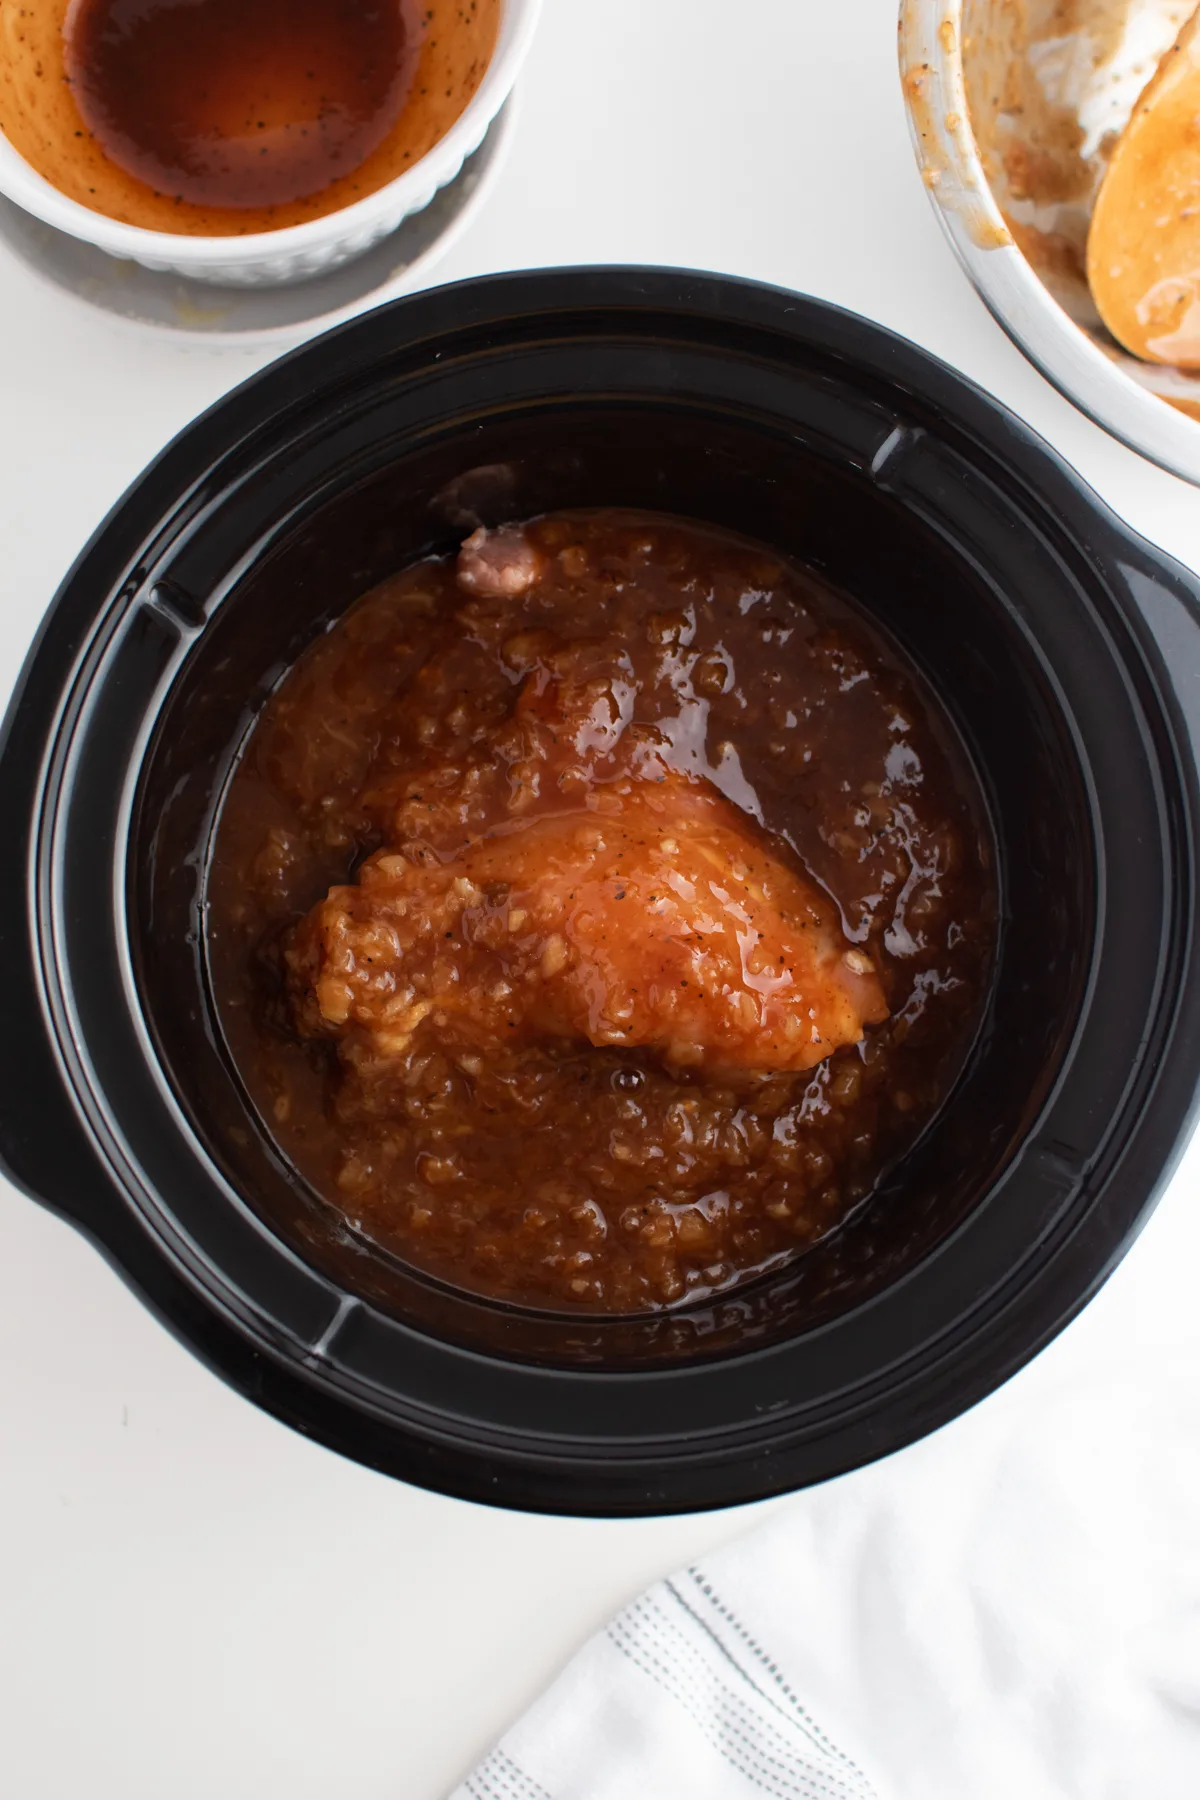 Cooked BBQ chicken thighs in large black Crock Pot with lots of sauce.